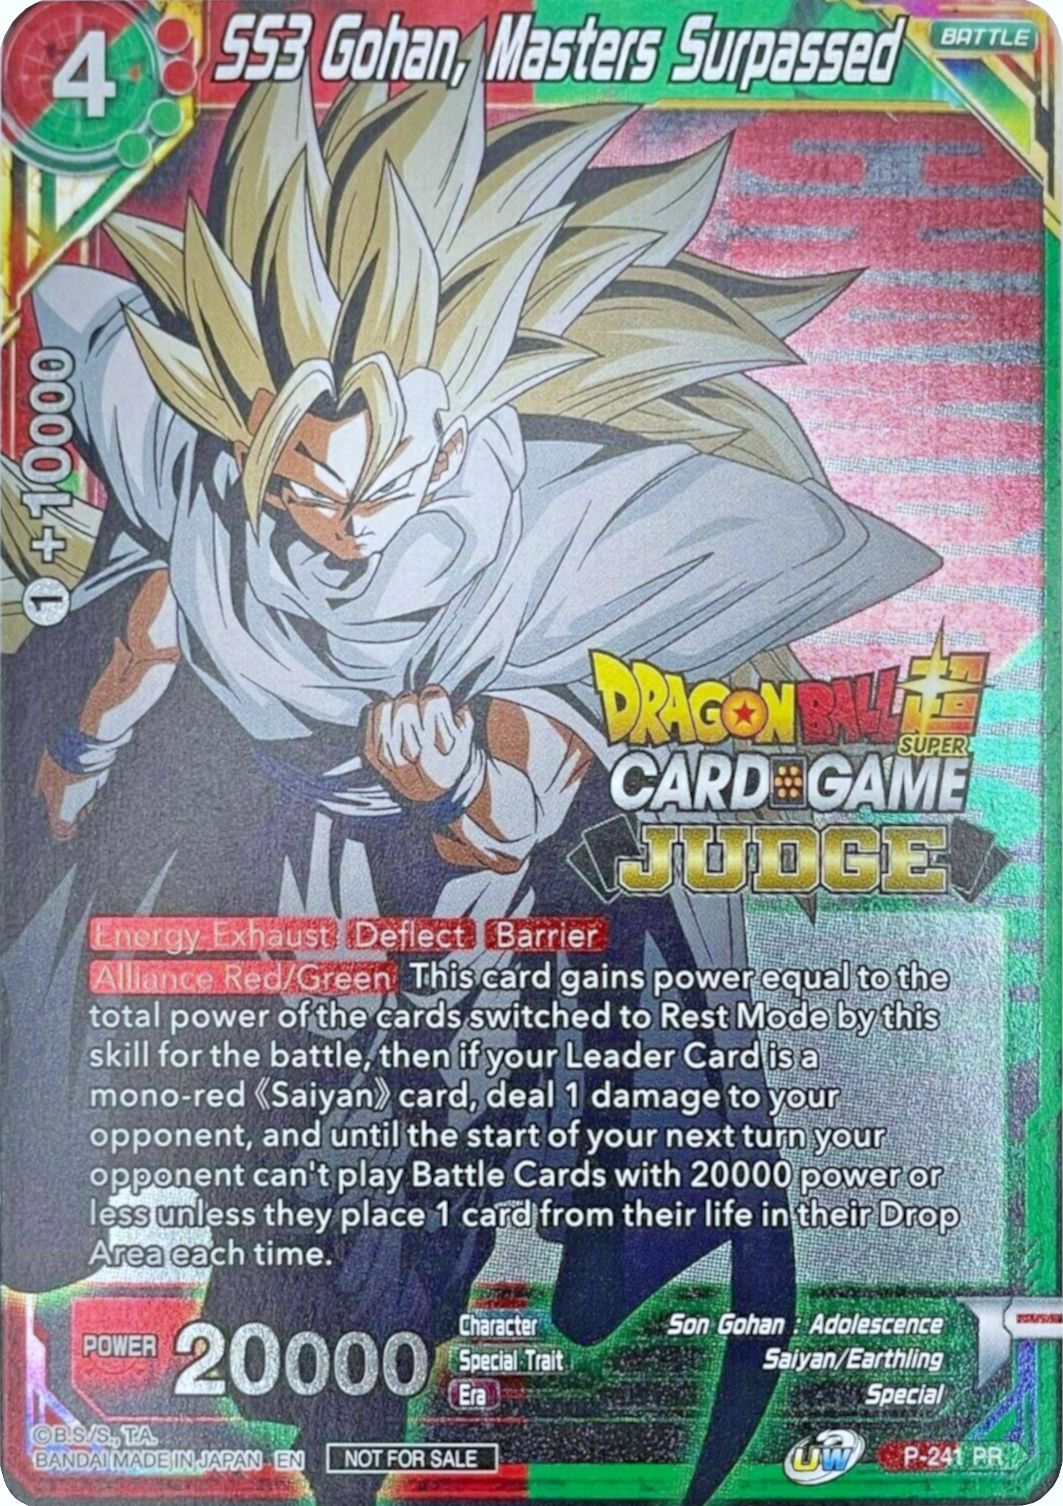 SS3 Gohan, Masters Surpassed (Level 2) (P-241) [Promotion Cards] | Red Riot Games CA